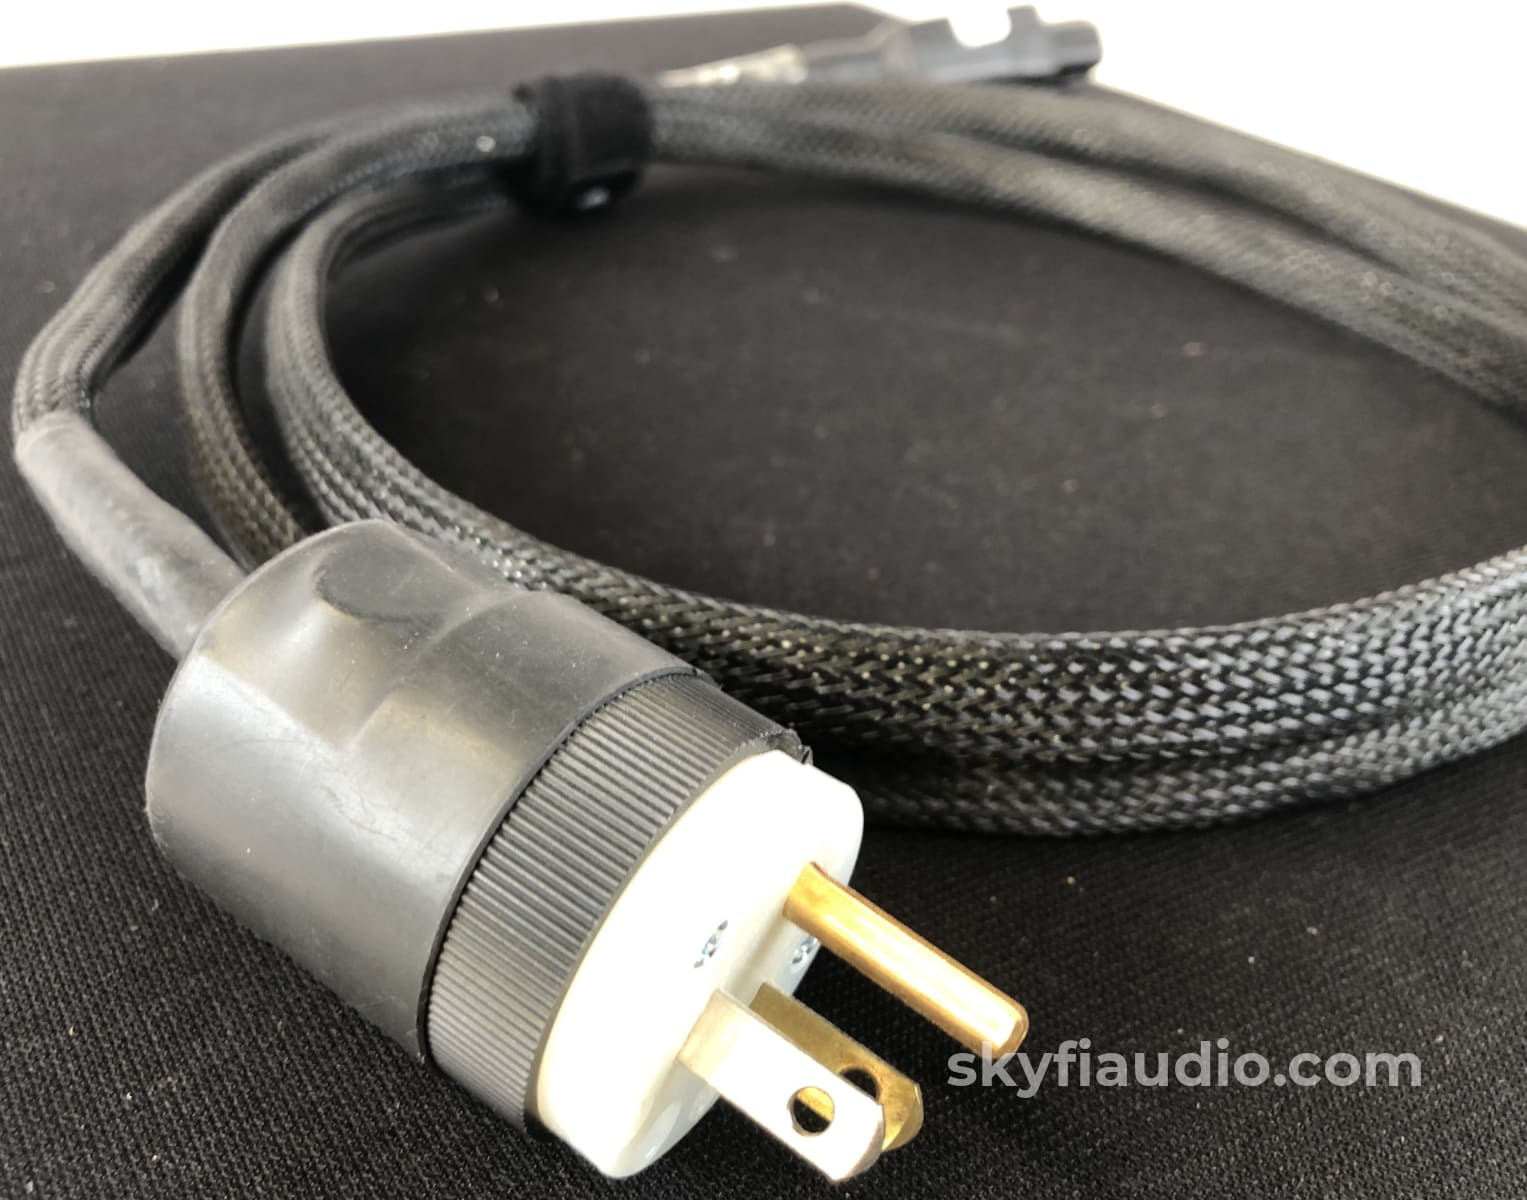 Nbs (Nothing But Signal) Dragonfly Power Cable - 6 Cables